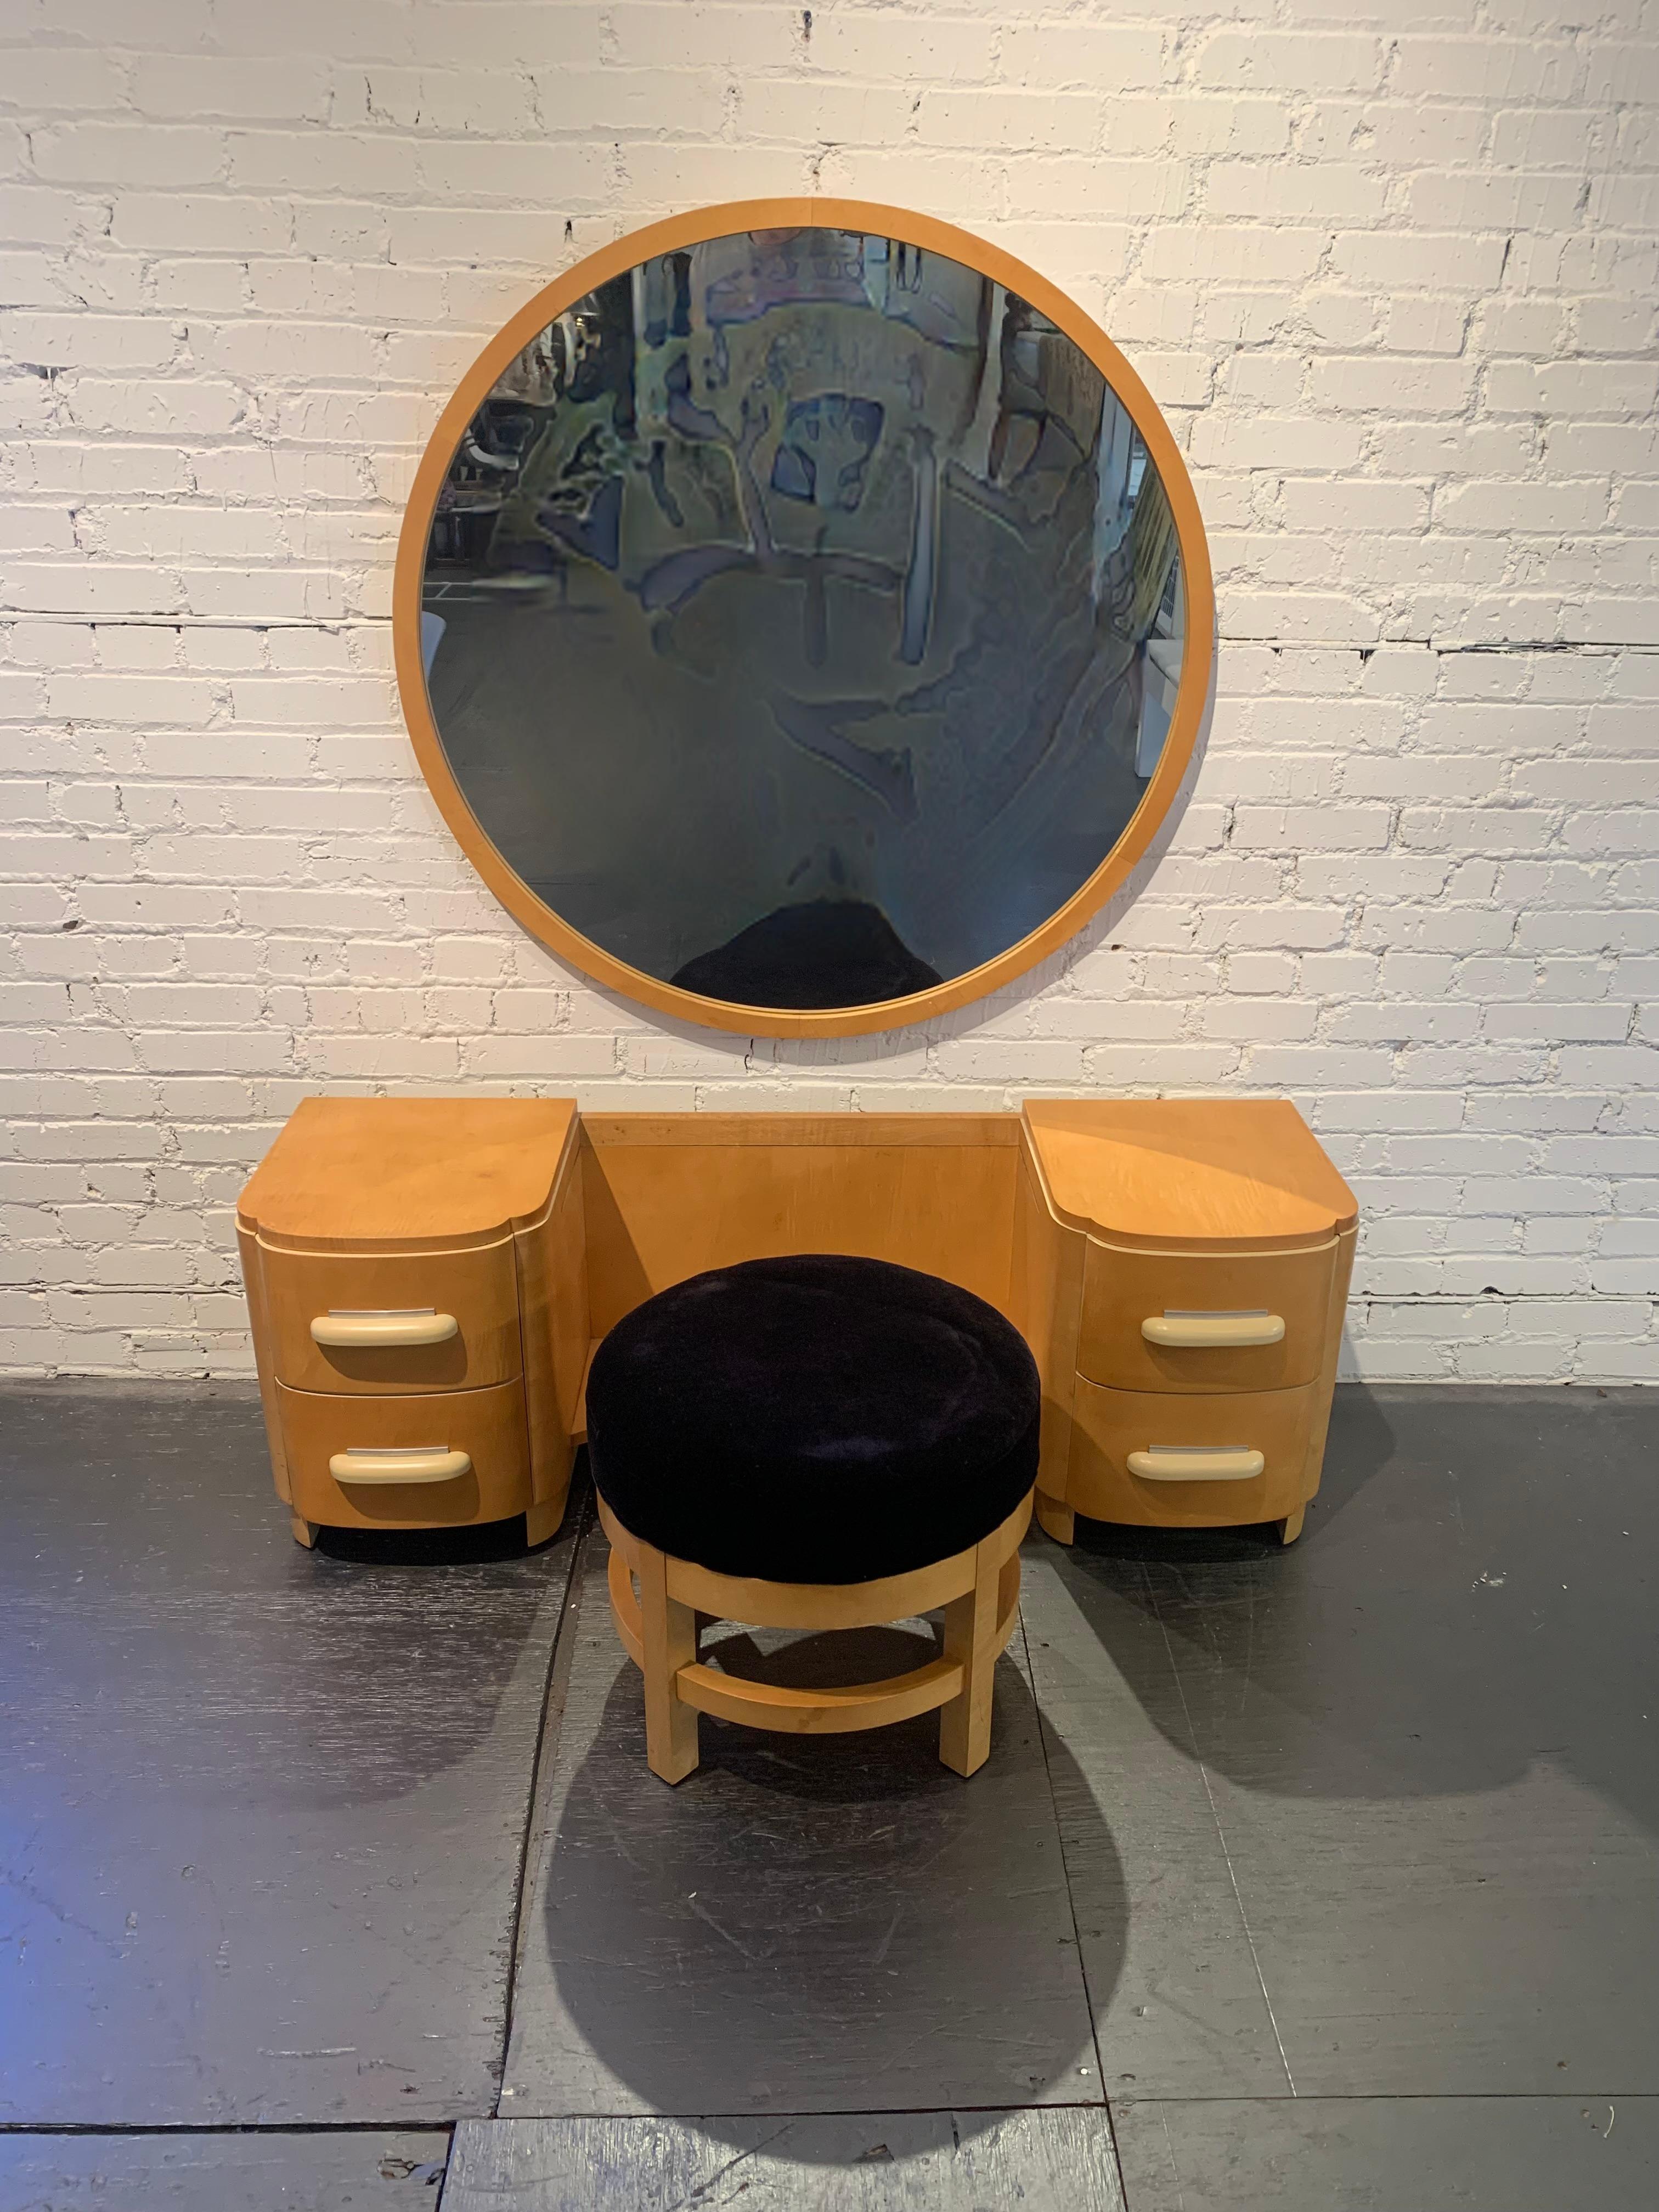 Wonderful period streamline Art Deco design vanity dressing table & vanity stool with large round mirror by Donald Deskey (1894-1989) for Widdicomb furniture in maple veneer with aluminum details. Cream lacquered handles and highlights. Mirror is